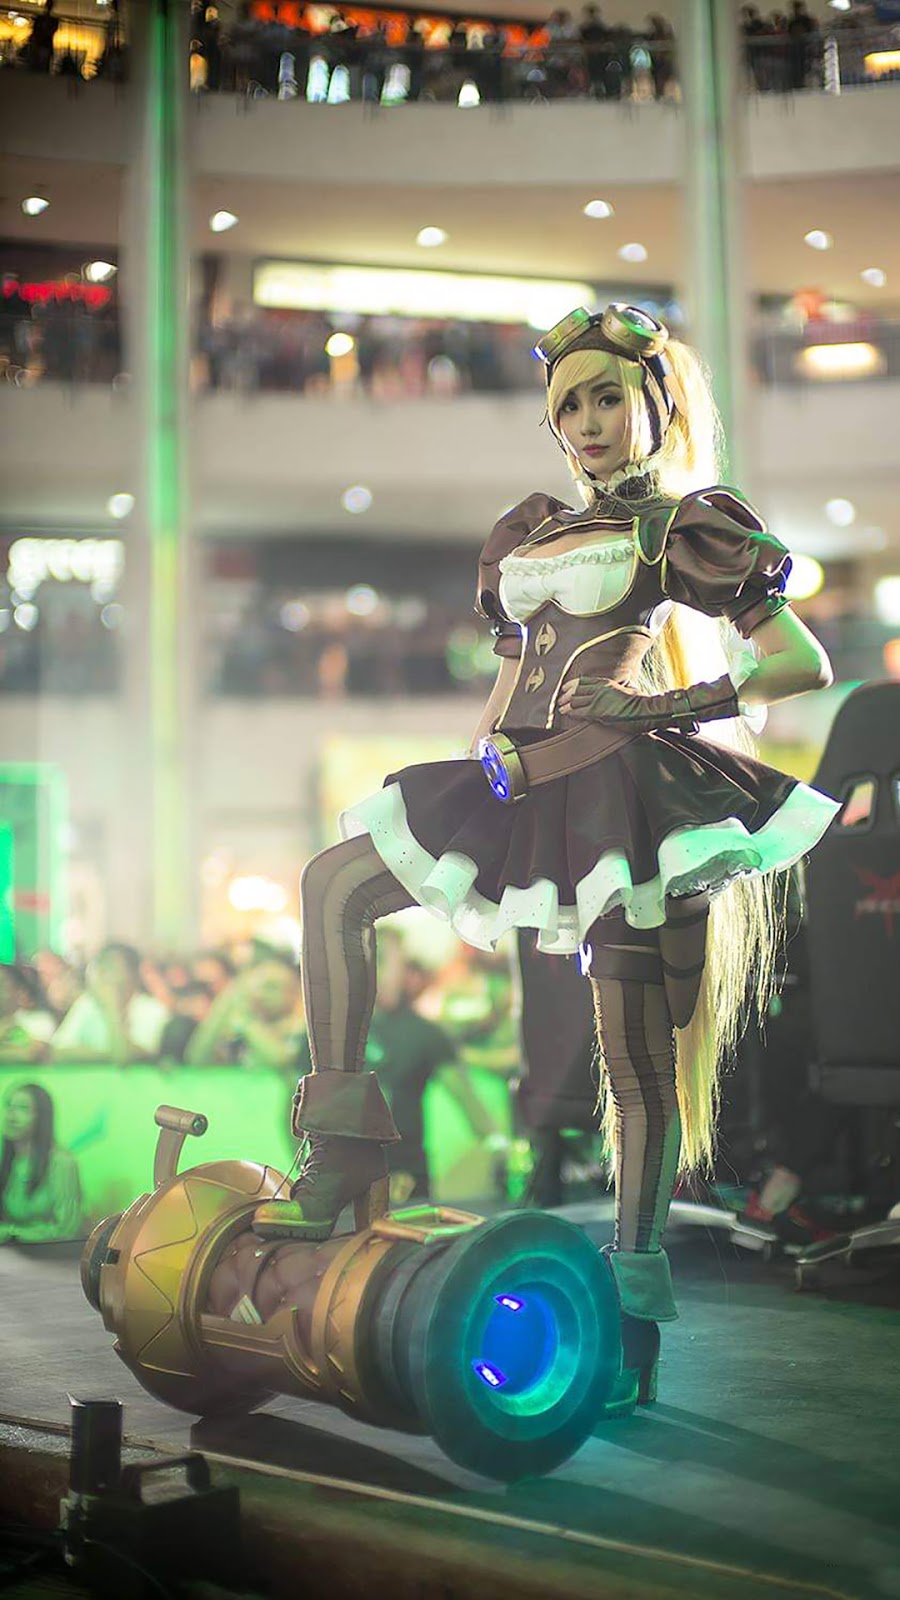  Wallpaper  Android Full HD  Cosplay  Hero Mobile  Legend  